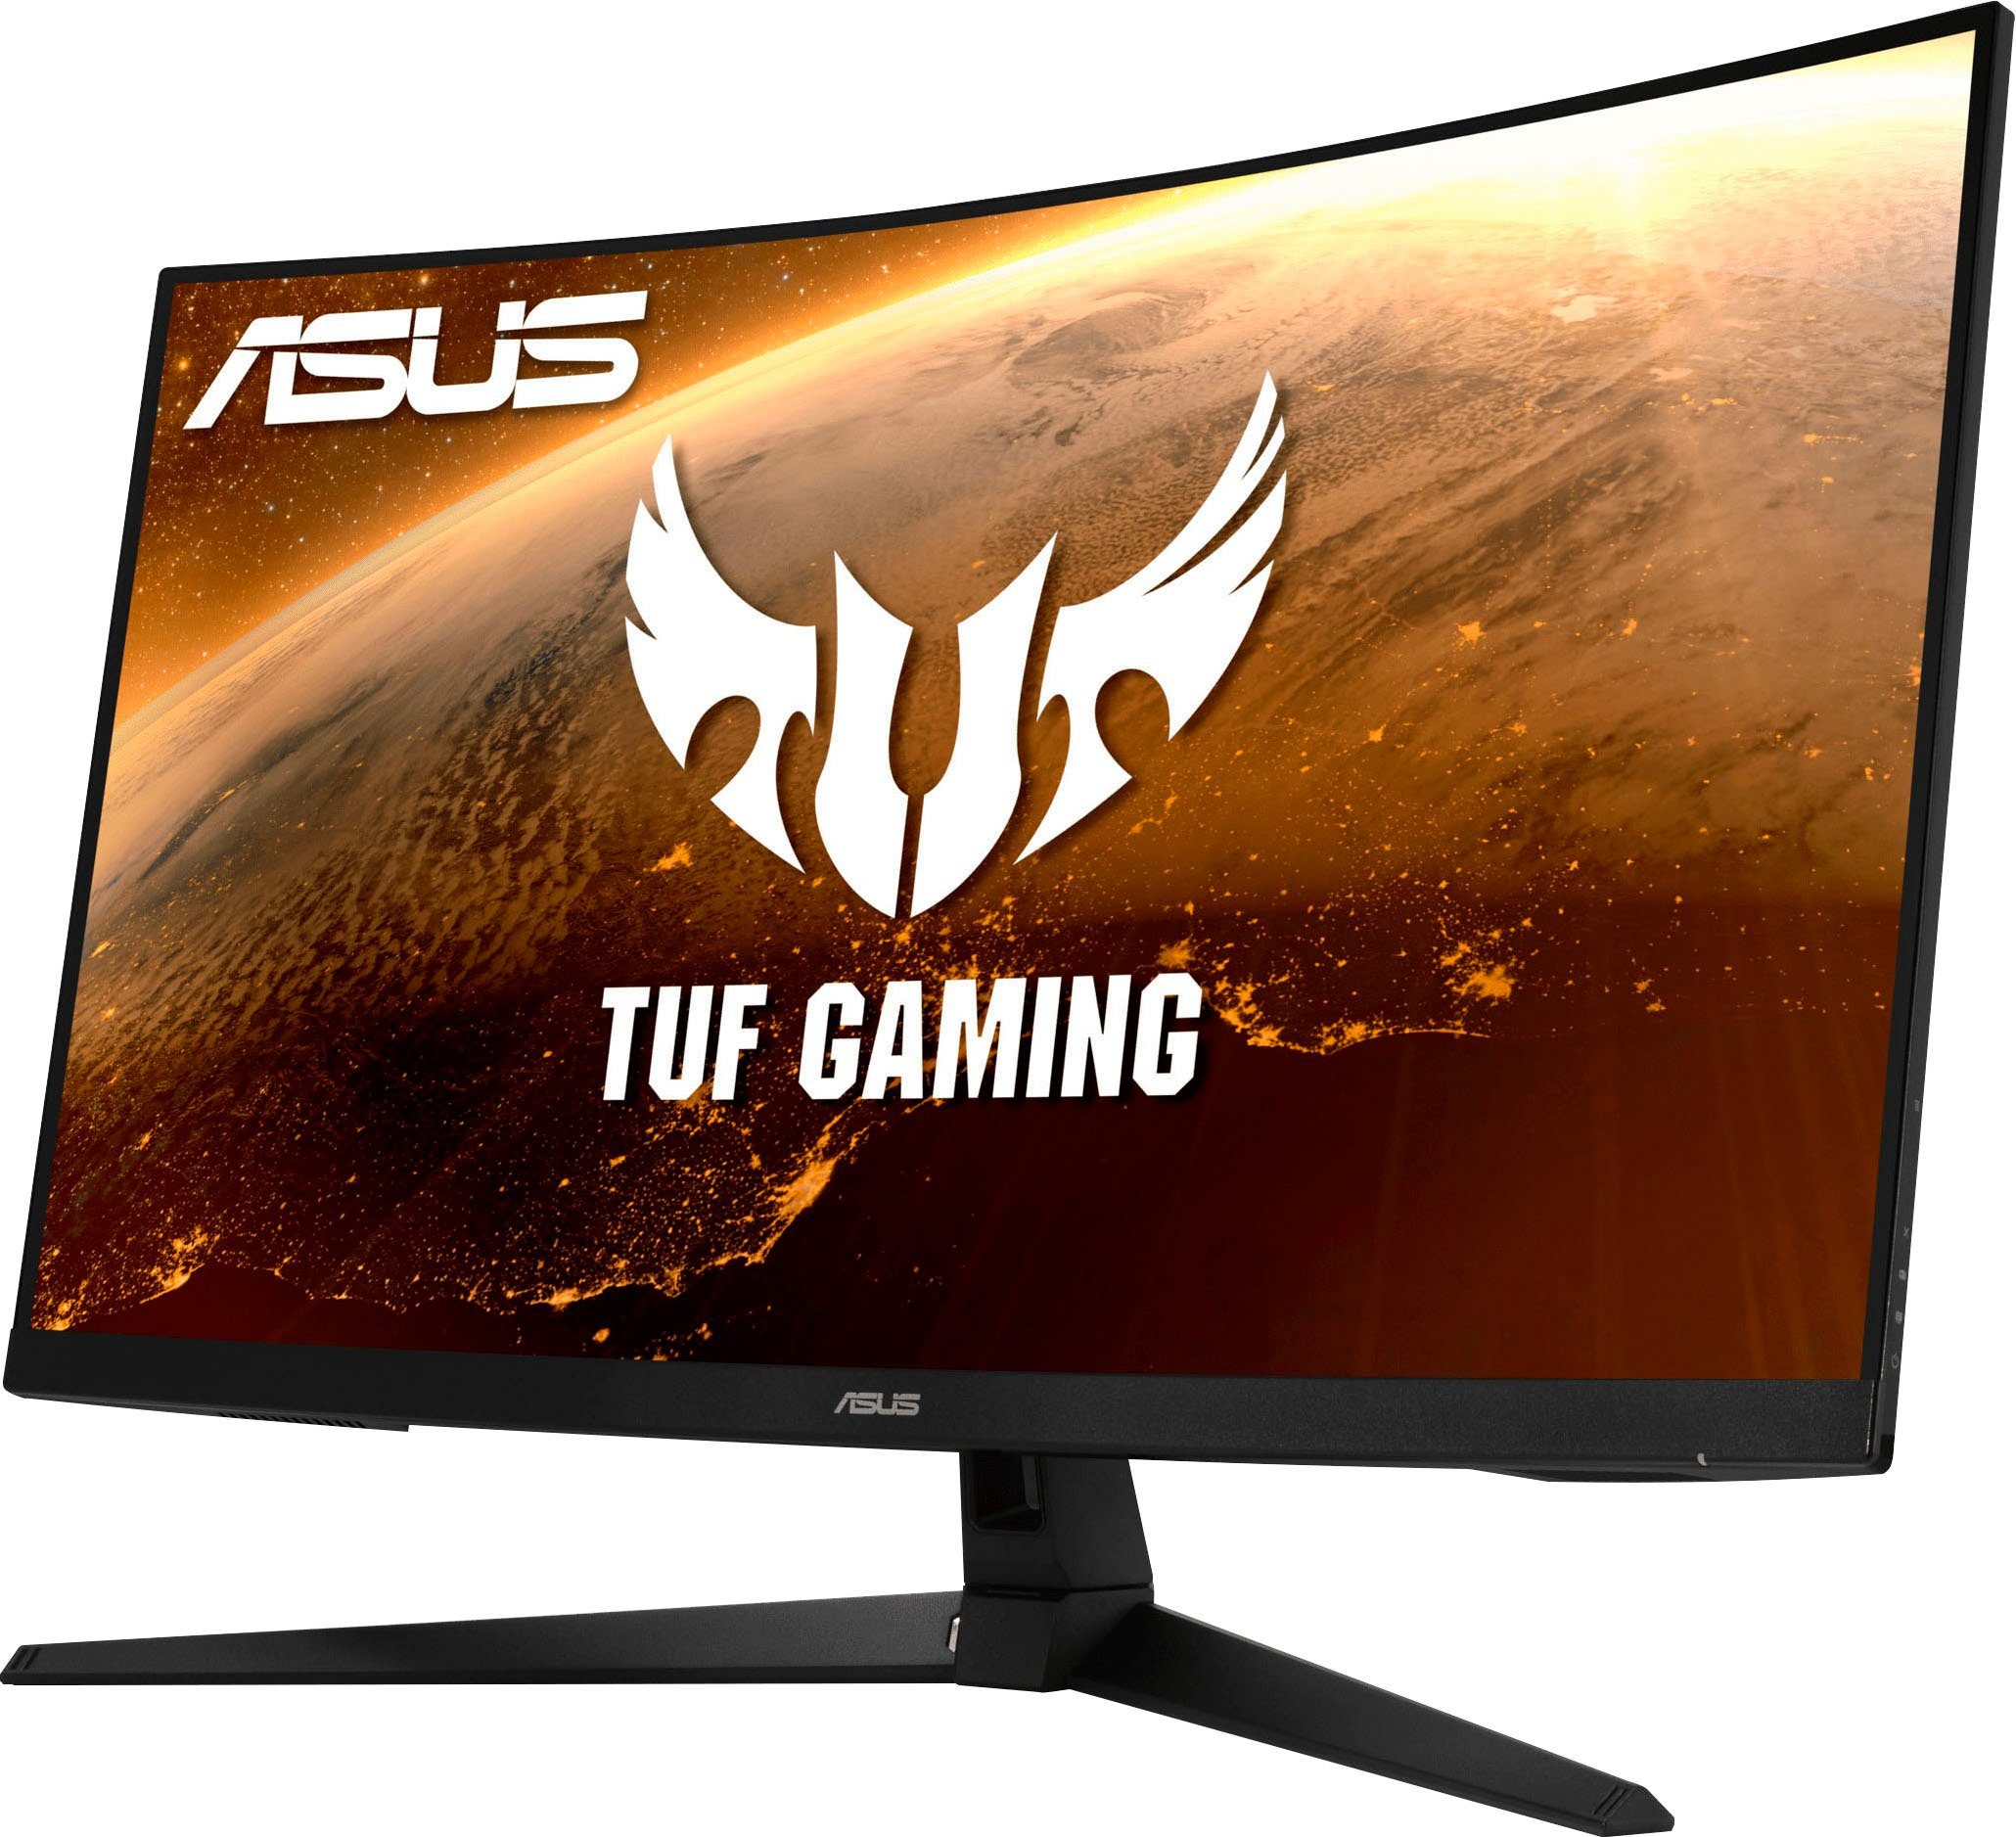 Asus VG32VQ1BR Curved-Gaming-Monitor (80 Hz, LED) ms ", QHD, cm/31,5 2560 px, 1440 165 x Reaktionszeit, 1